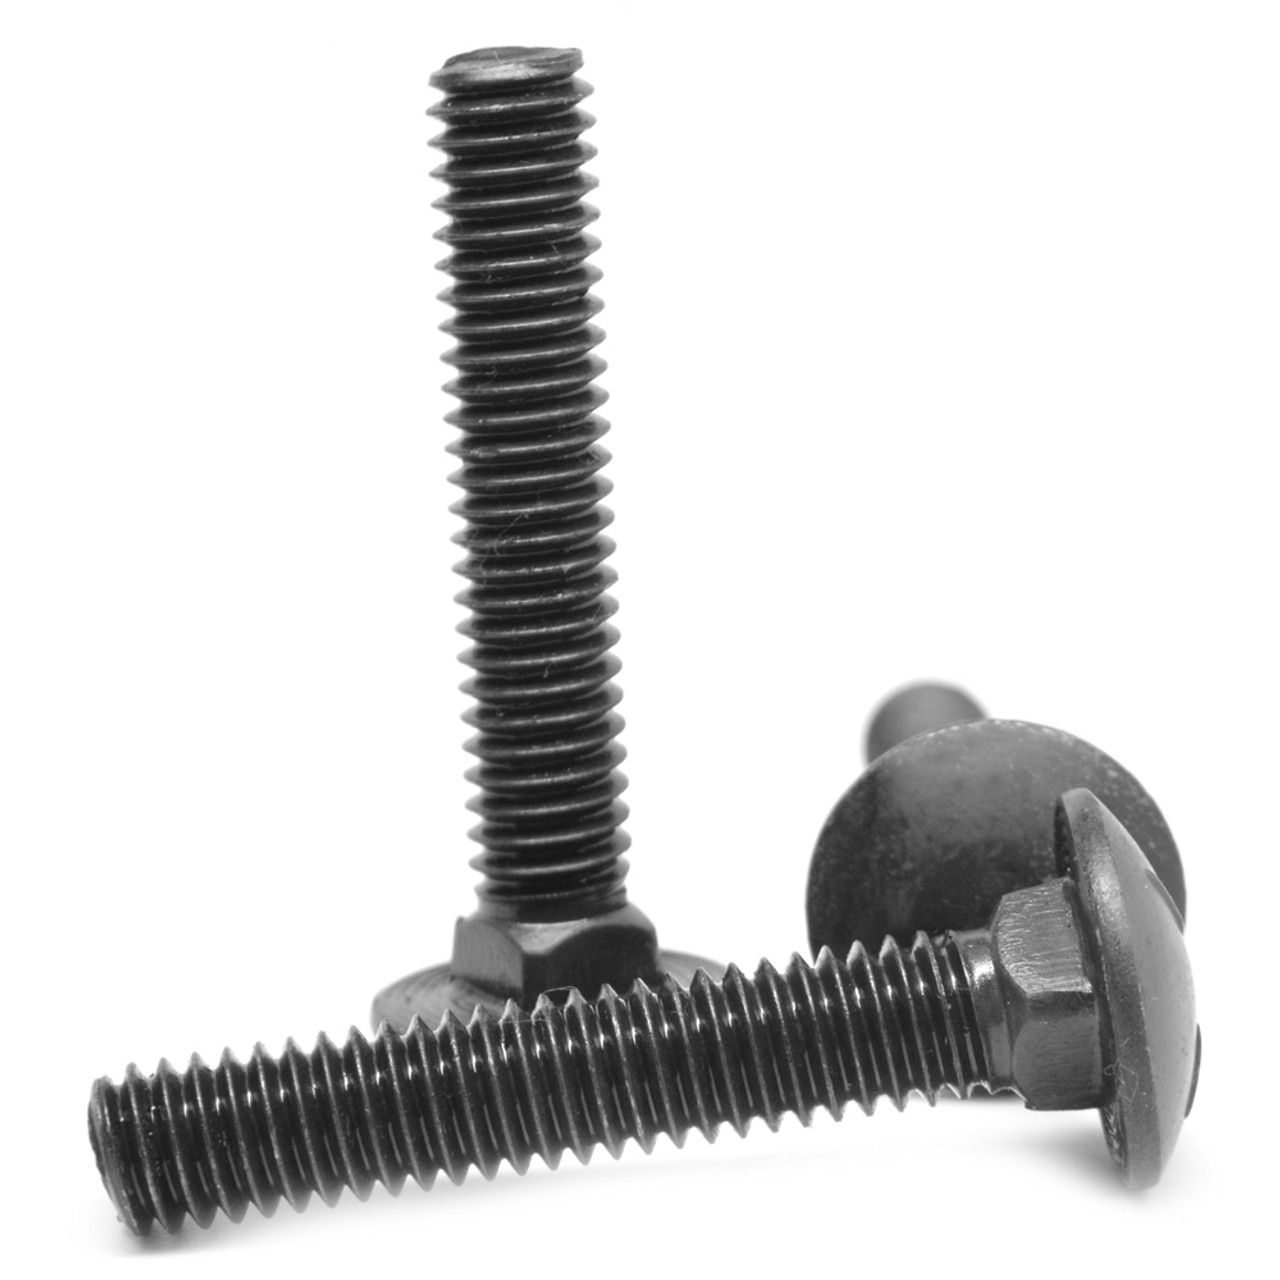 3/4-10 x 2 1/2 (FT) Coarse Thread Grade 8 Carriage Bolt Alloy Steel Thermal Black Oxide